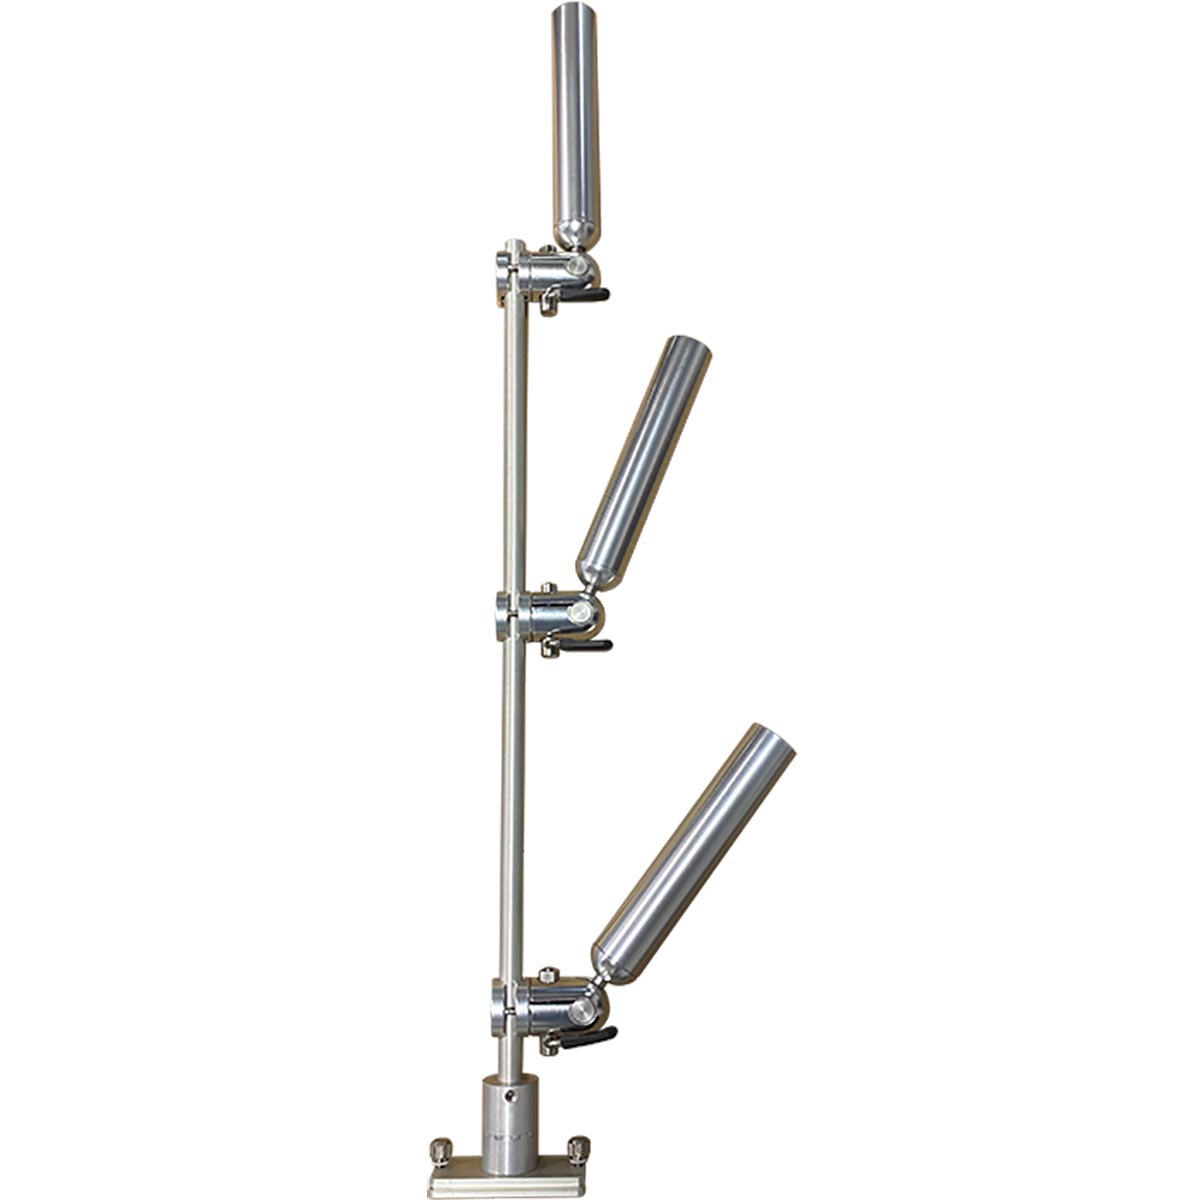 Most popular of the year RodTrees.com 8 Pack Pedestal Rod Holders